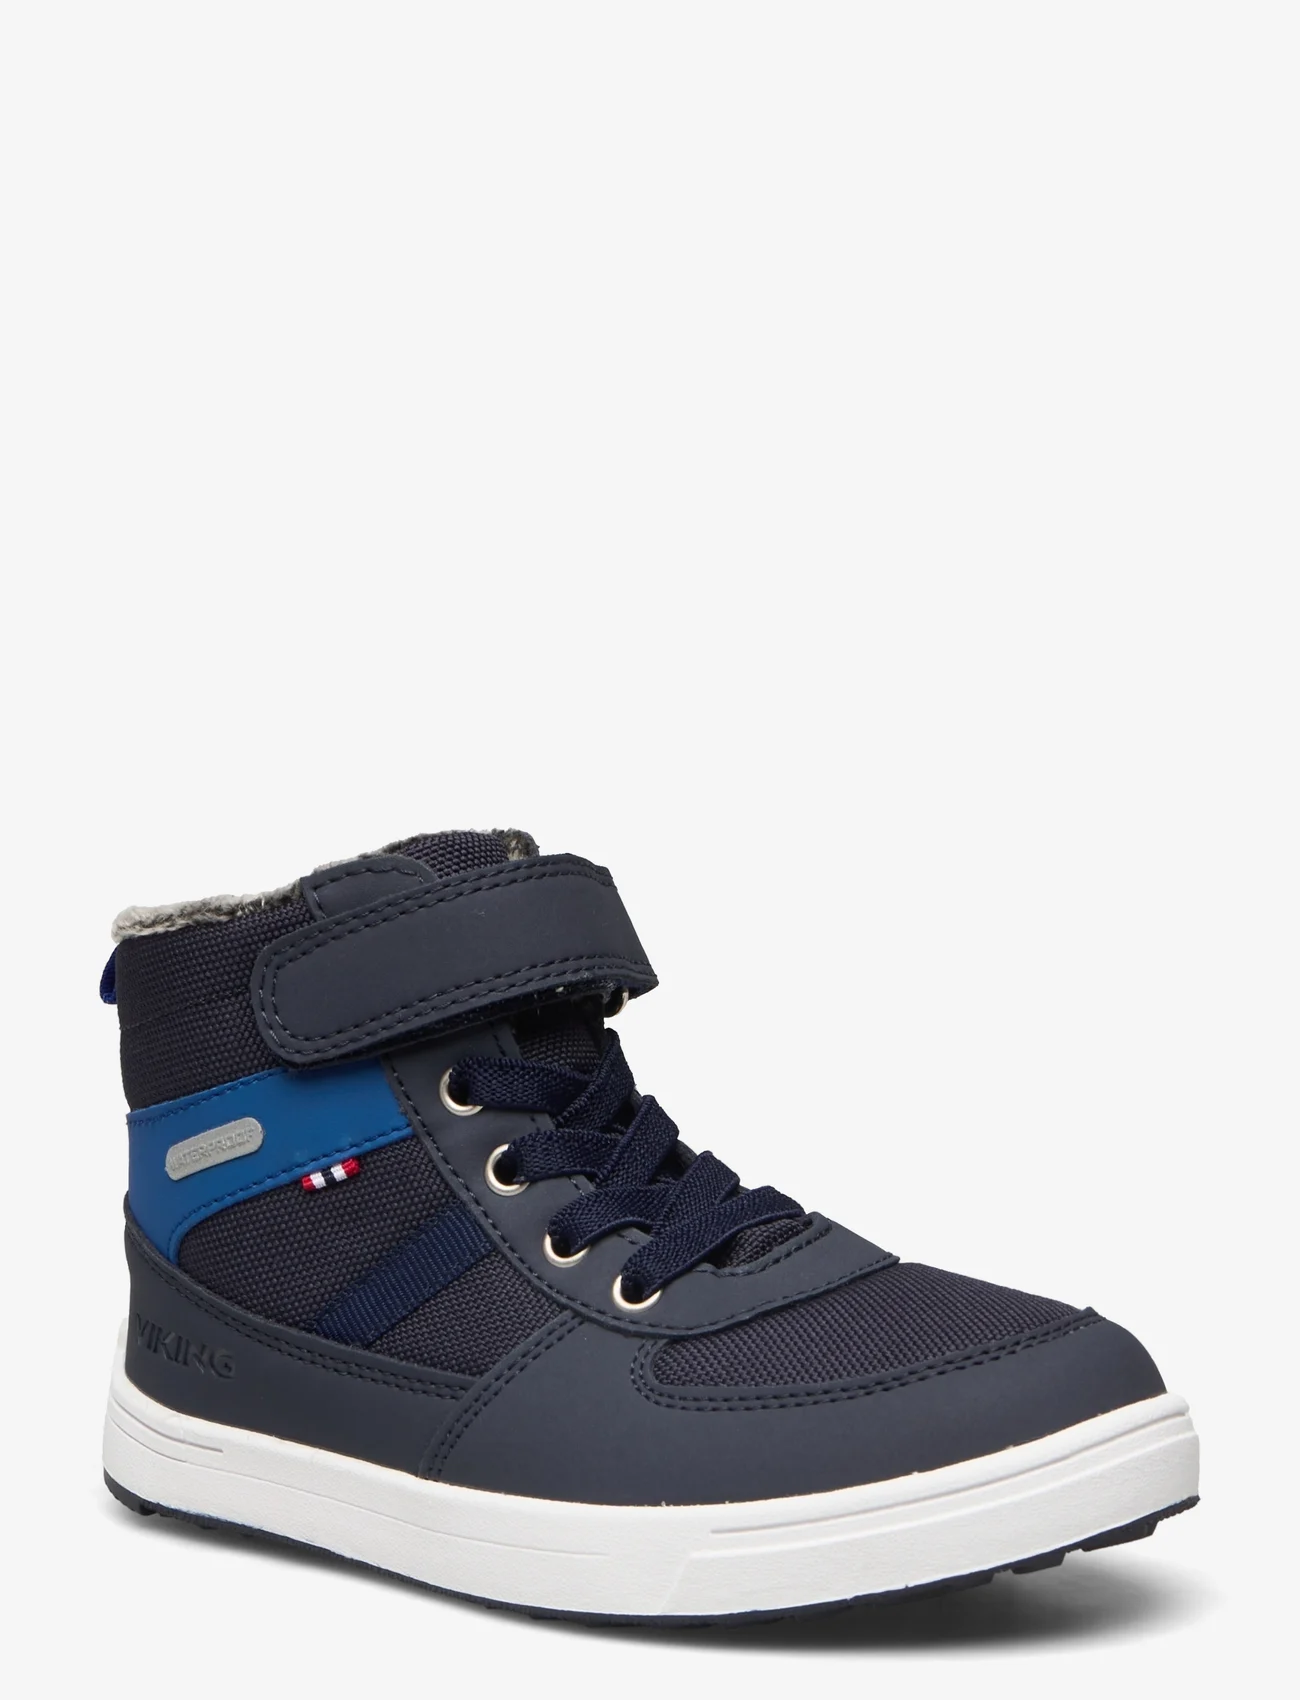 Viking - Lucas Warm WP 1V - chaussures - navy/blue - 0